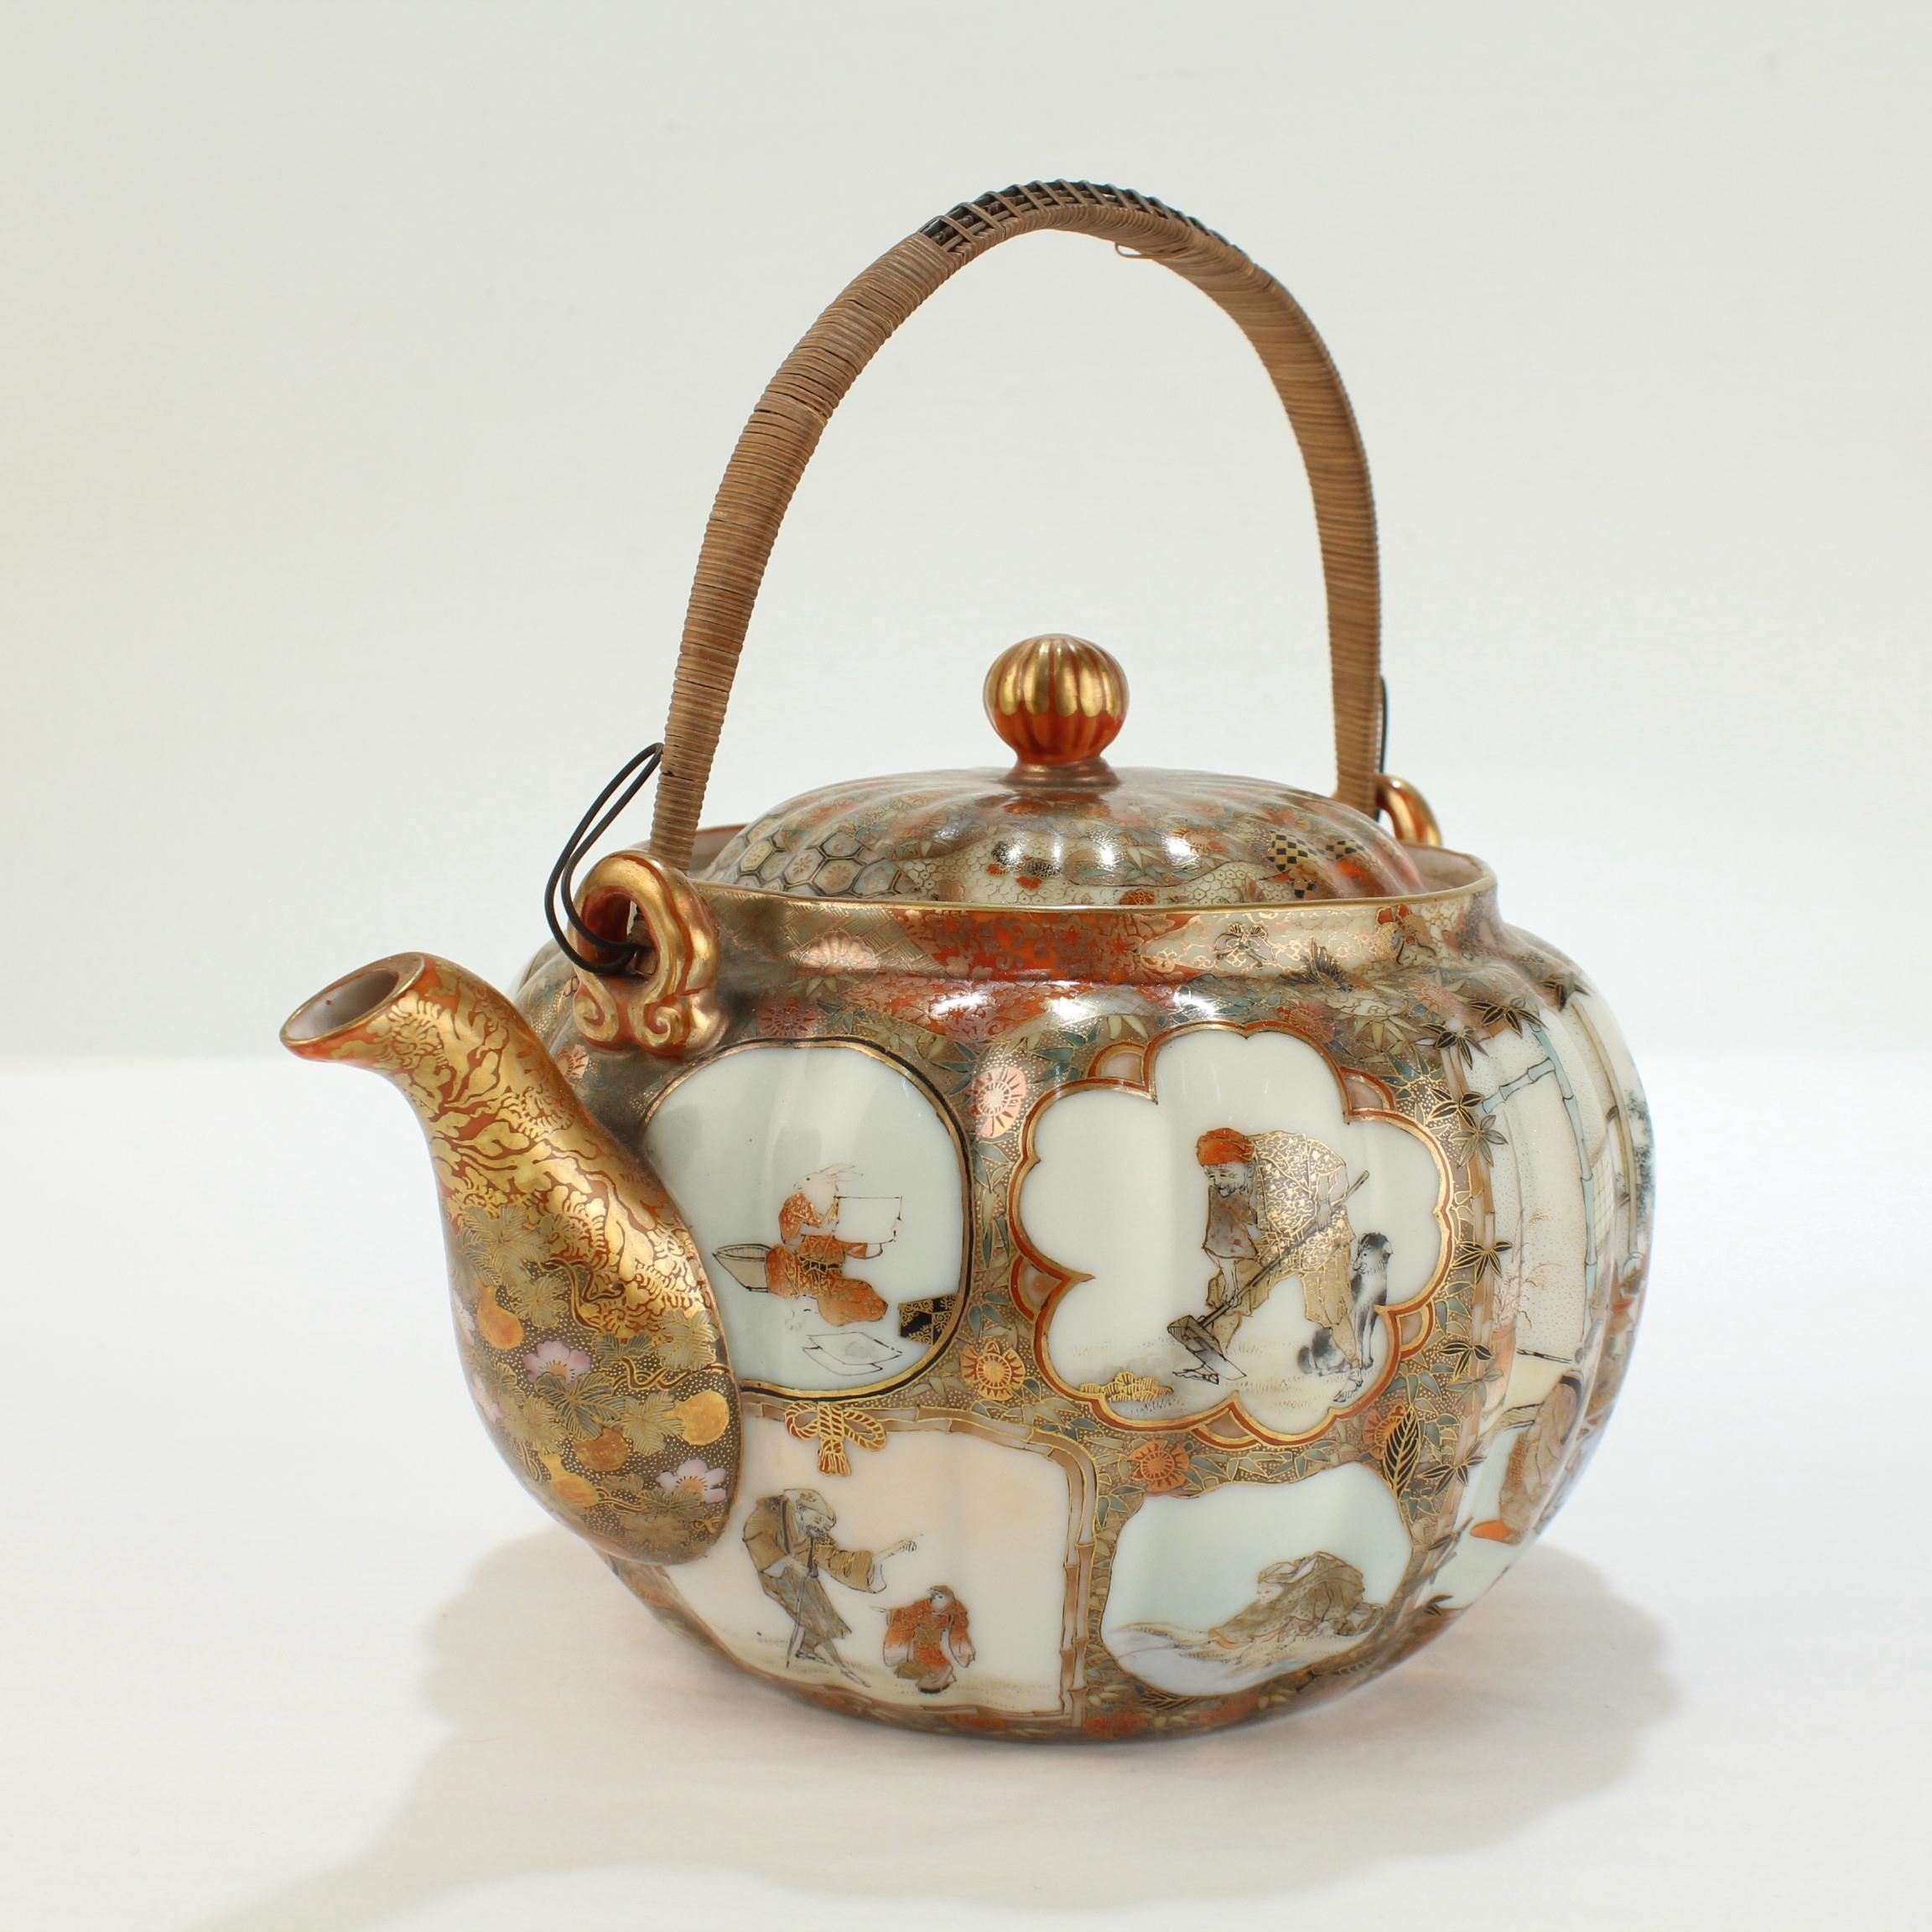 A fine antique Japanese Kutani porcelain teapot. 

With Satsuma style hand painted decoration throughout.

Having very finely hand painted botanical and bamboo decoration and cartouches with various scenes around the body and lid, a wire and